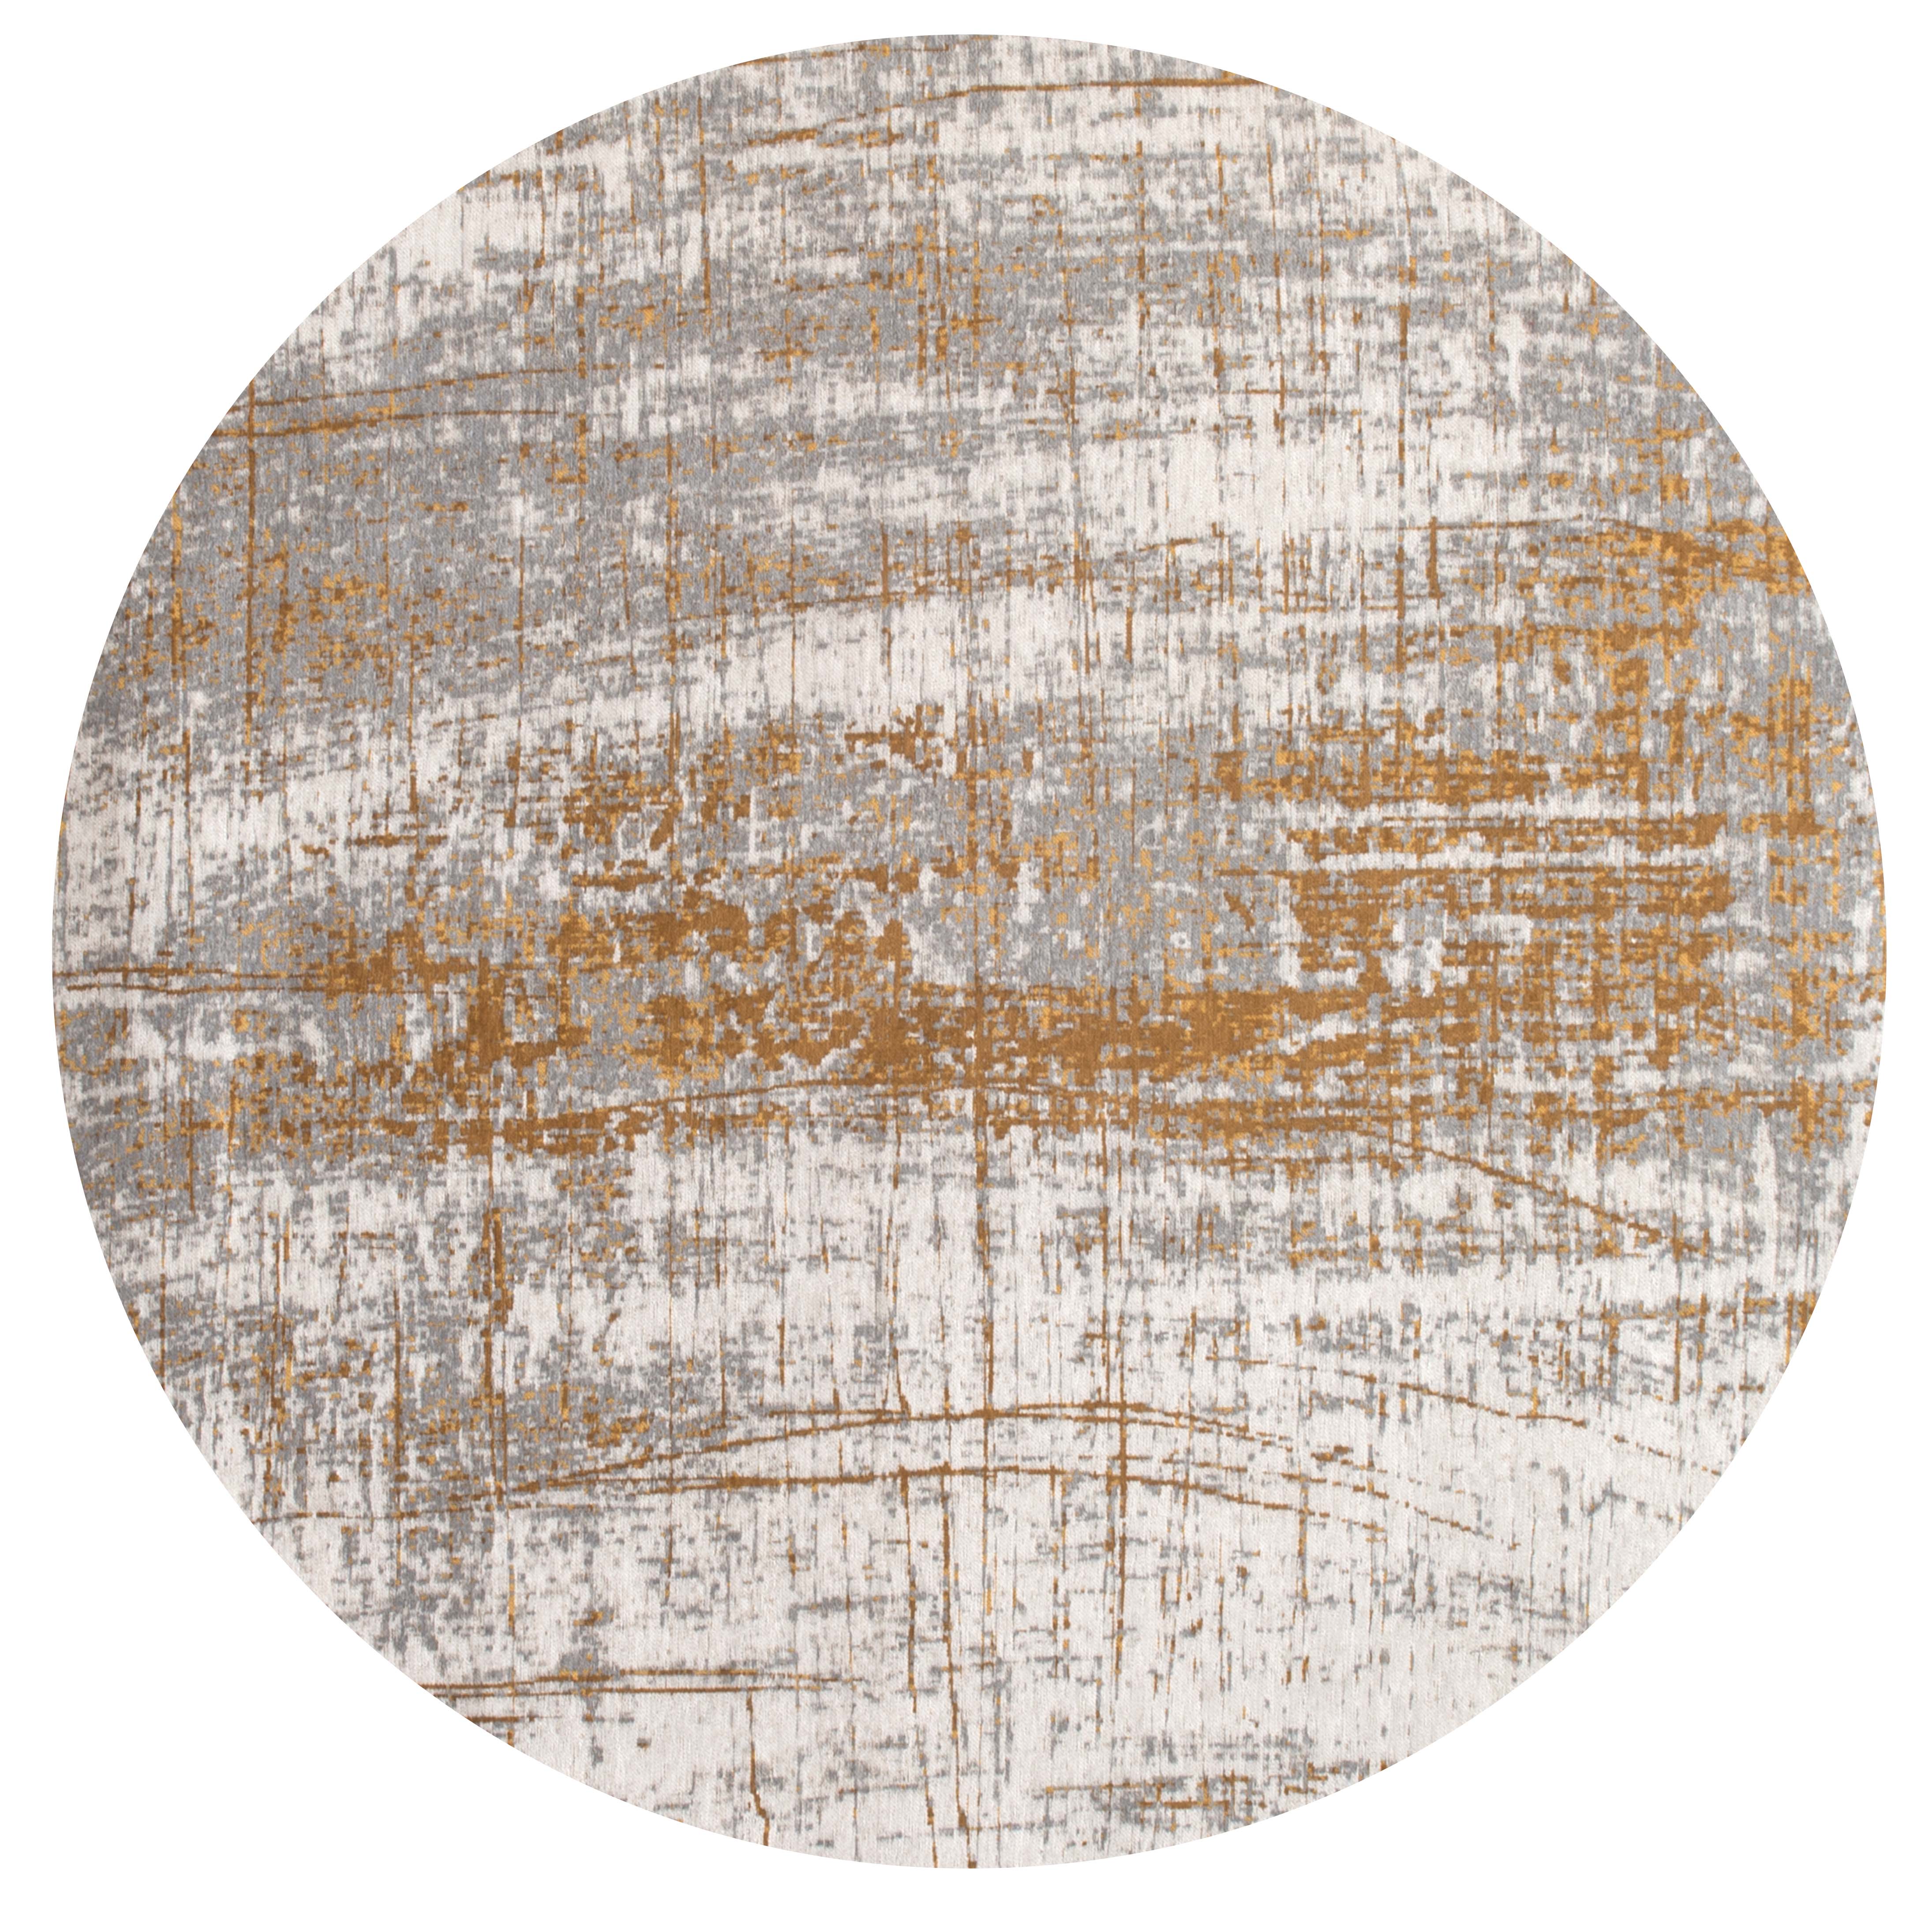 White circle flatweave rug with grey and yellow abstract pattern